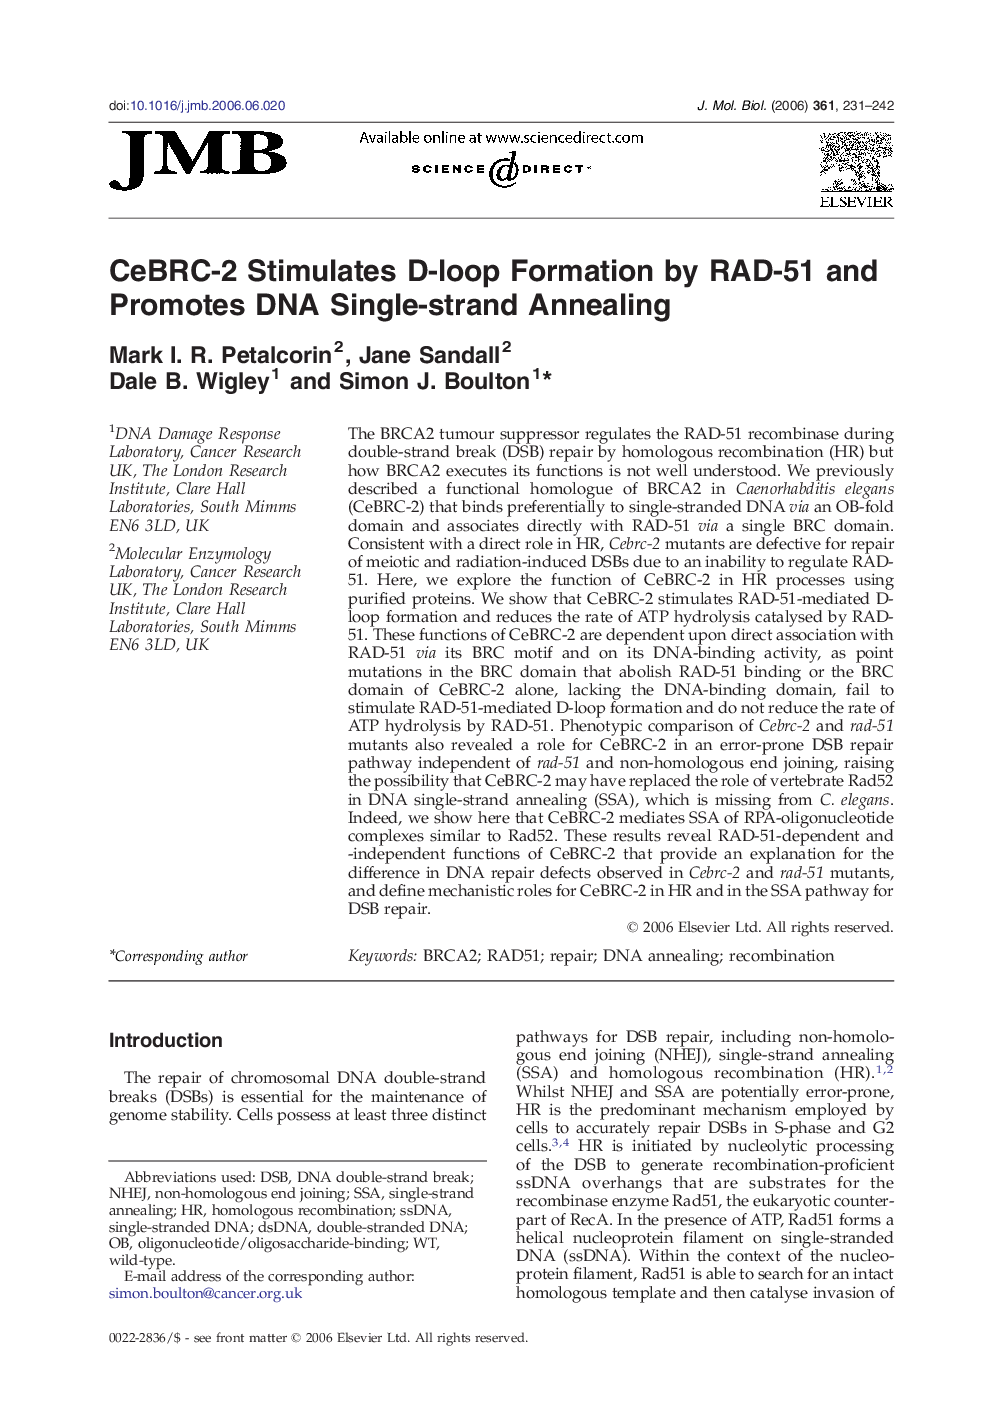 CeBRC-2 Stimulates D-loop Formation by RAD-51 and Promotes DNA Single-strand Annealing